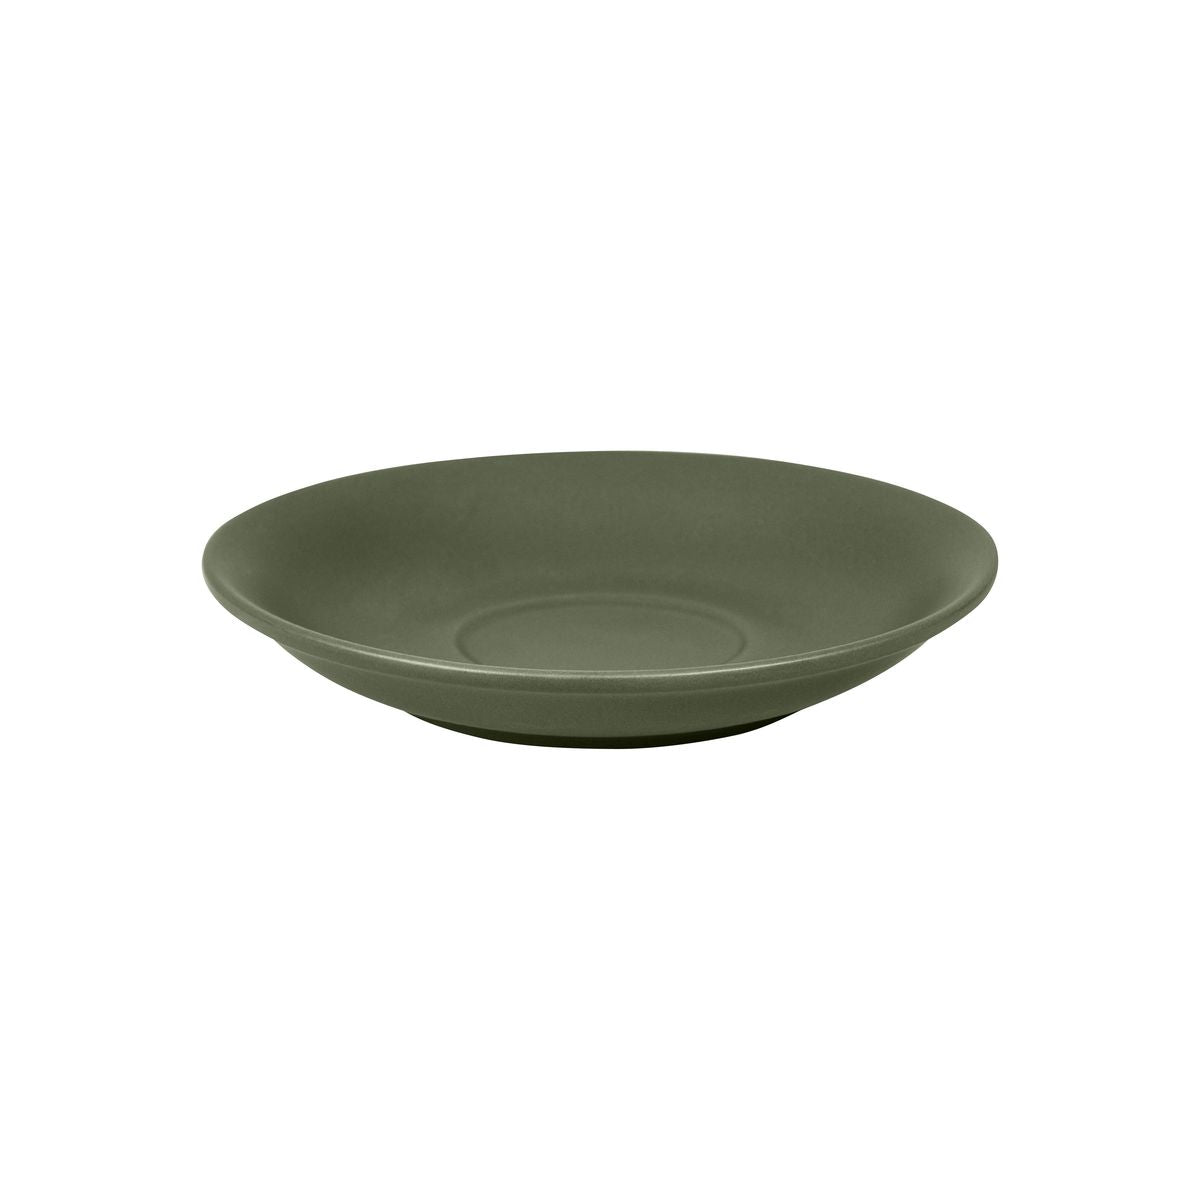 Saucer - Sage, 140mm, Universal from Bevande. made out of Porcelain and sold in boxes of 6. Hospitality quality at wholesale price with The Flying Fork! 